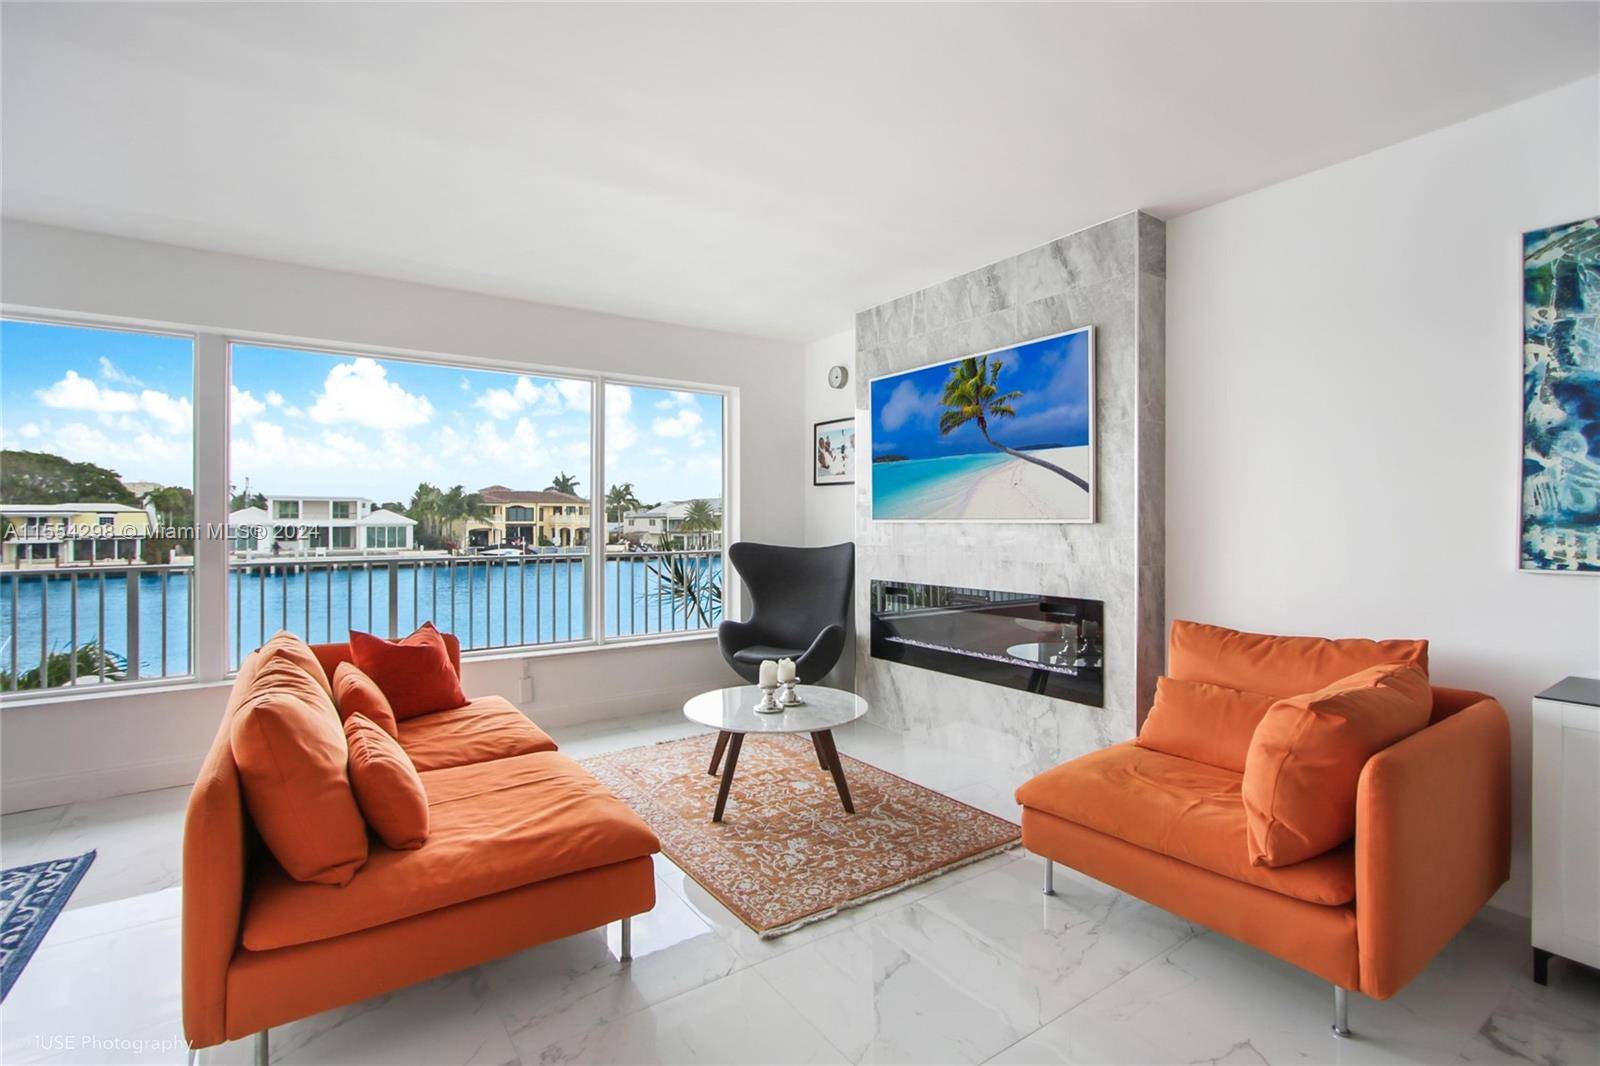 Introducing this luxurious waterfront retreat at the tip of the Isle of Venice peninsula !